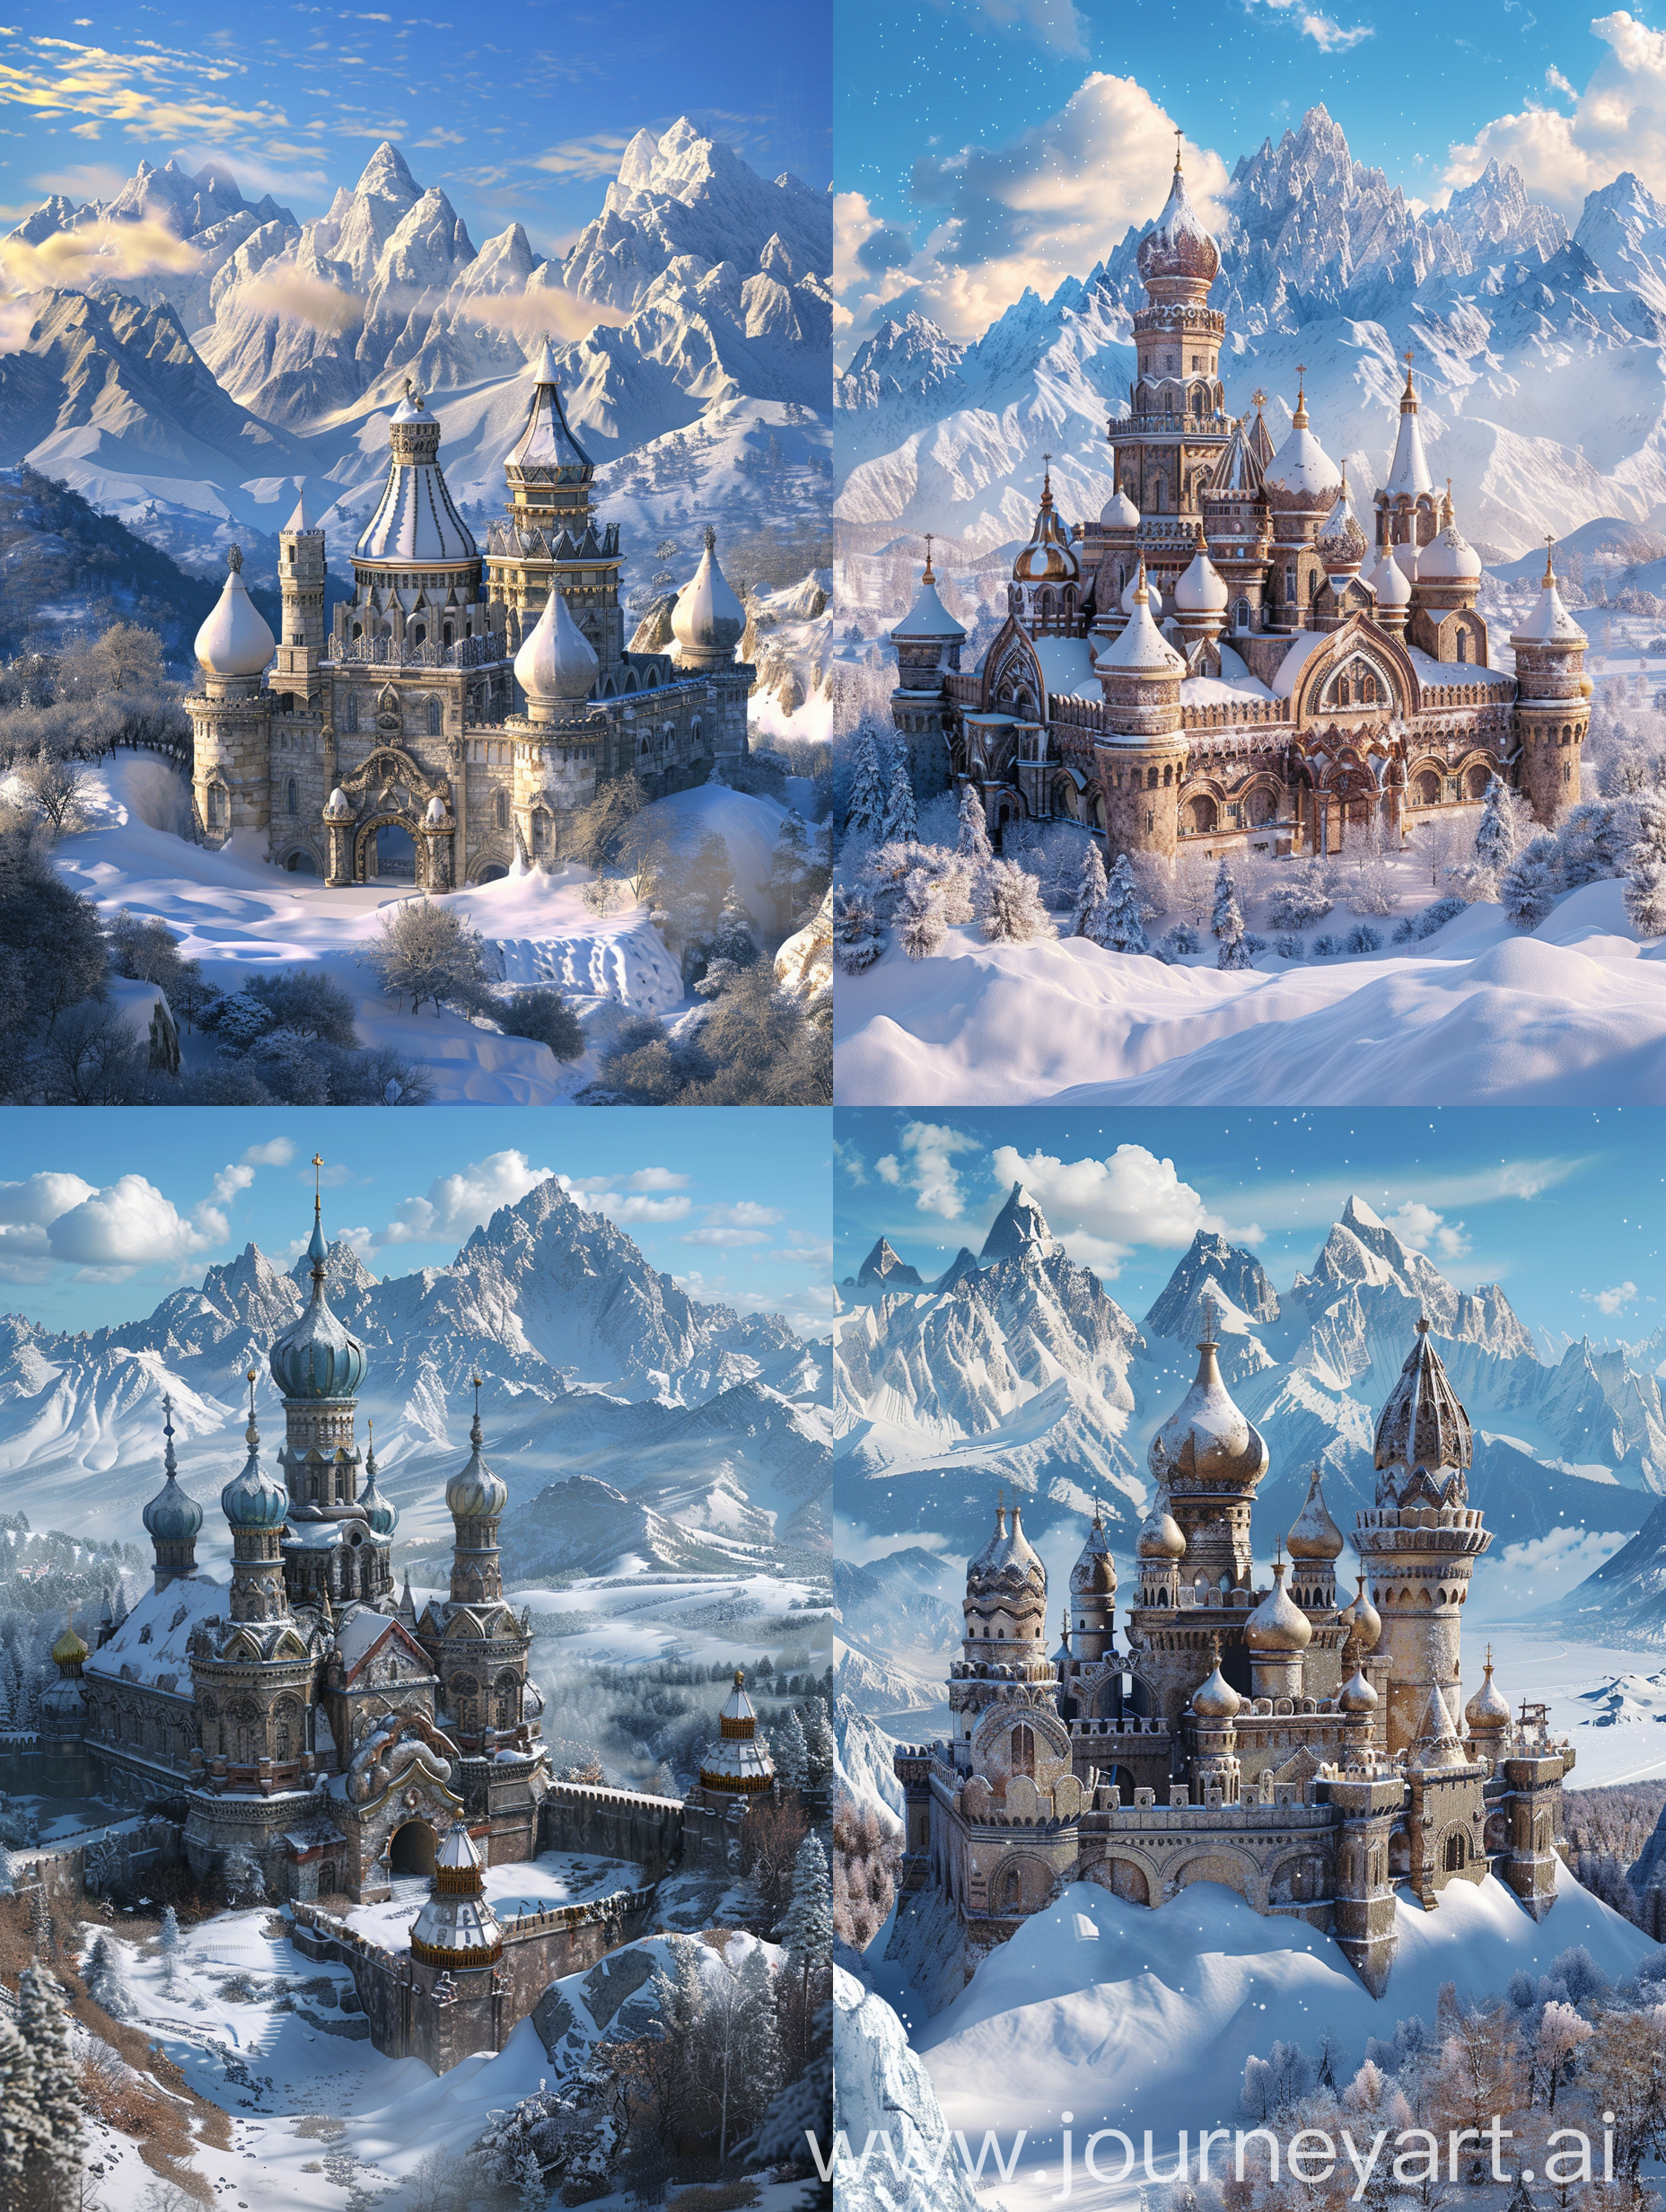 Generate a hyper-realistic image of a Kremlin-style castle nestled amidst a pristine winter landscape, with snow-capped mountains stretching into the distance. Ensure that the castle’s architecture is meticulously detailed, capturing the intricate carvings, ornate domes, and weathered stone walls characteristic of Kremlin design. Pay special attention to the integration of the castle into its surroundings, with seamless blending between the man-made structure and the natural environment. Implement realistic snow textures, accounting for variations in depth and density across the landscape, and adding subtle imperfections like drifts and snow-covered vegetation. Utilize advanced lighting techniques to replicate the soft, diffuse glow of winter sunlight, casting realistic shadows and highlights that accentuate the contours of the terrain. Enhance the atmosphere with subtle touches such as distant clouds clinging to the mountain peaks, the soft sparkle of sunlight on freshly fallen snow, and the faint mist rising from hidden valleys below. By faithfully recreating the beauty and intricacy of both the castle and its surrounding landscape, aim to transport viewers to a world of breathtaking realism and immersive detail.